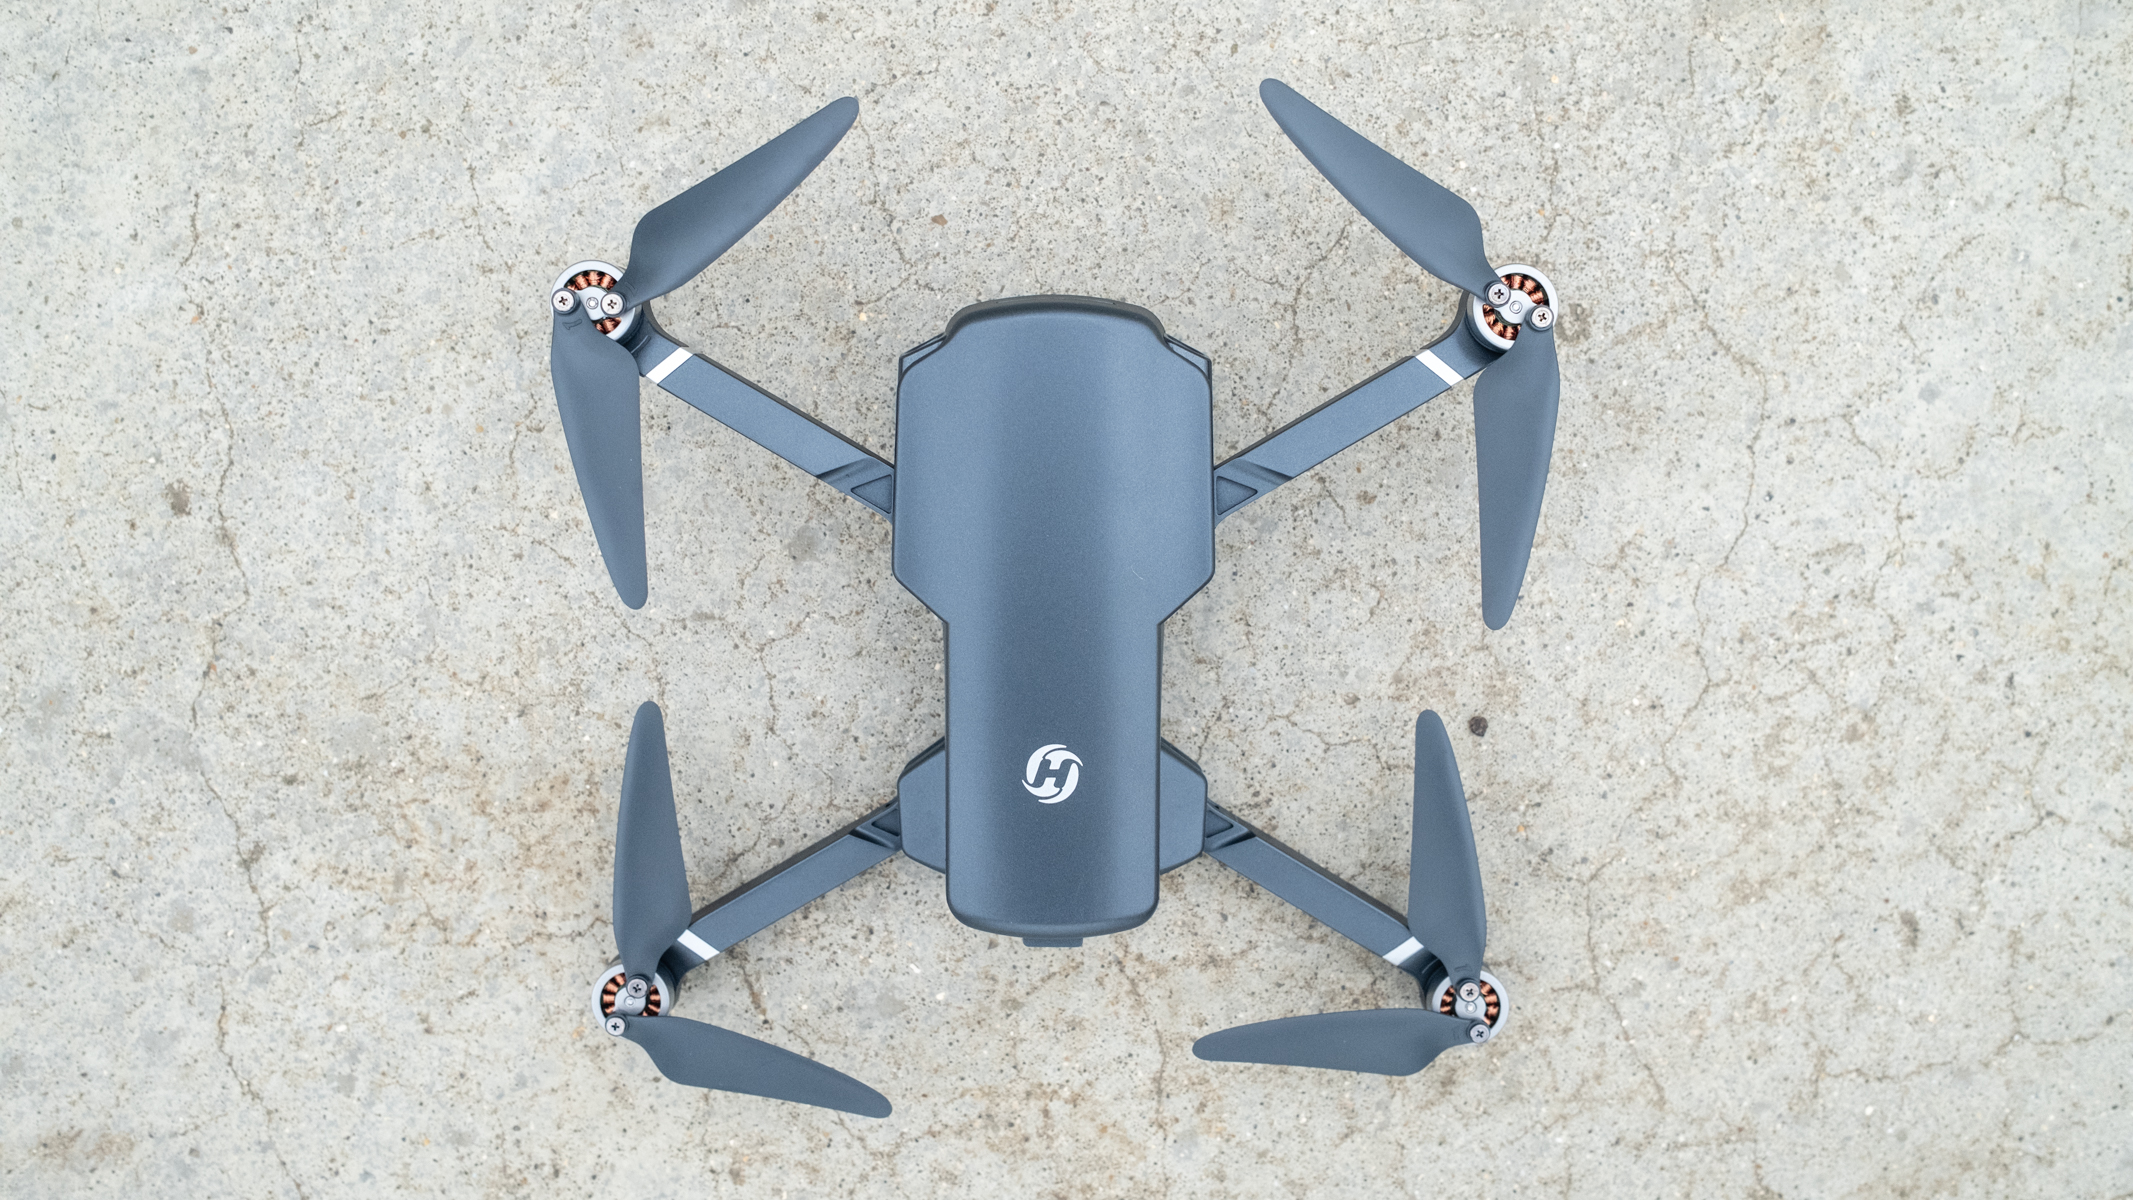 Holy Stone HS360S drone unfolded on concrete